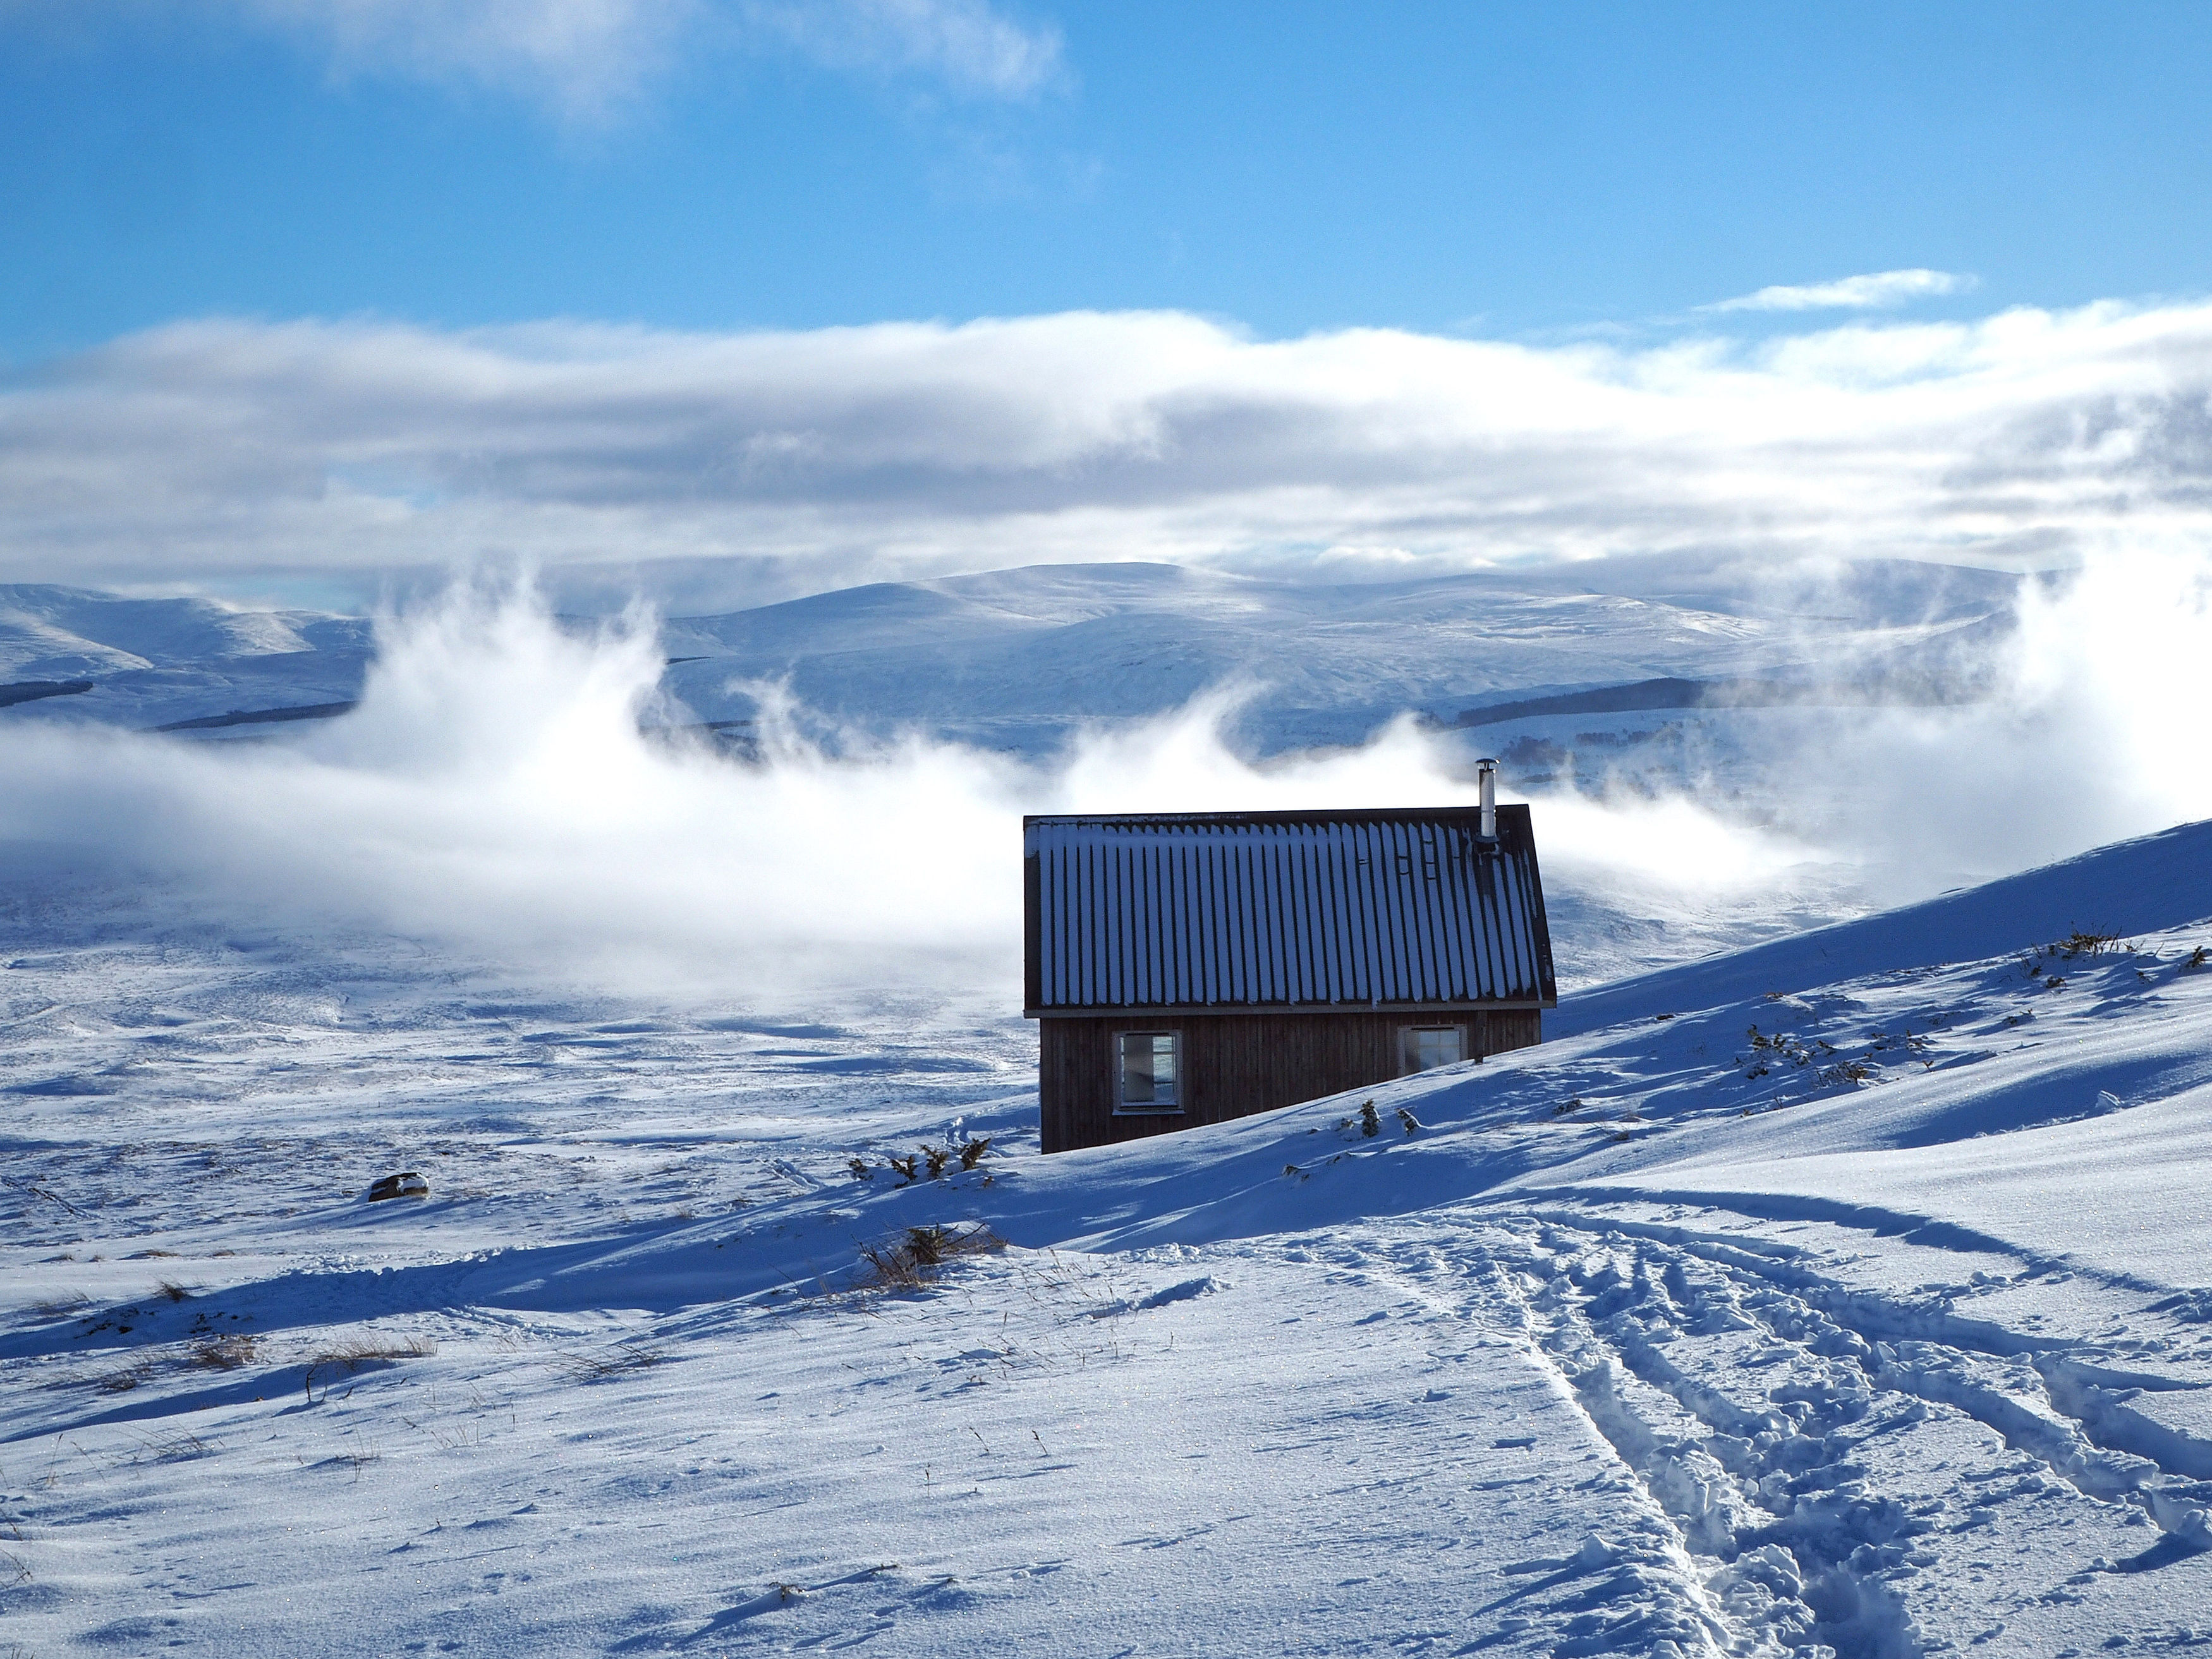 A bothy shelter above Kingussie in the Scottish Highlands.